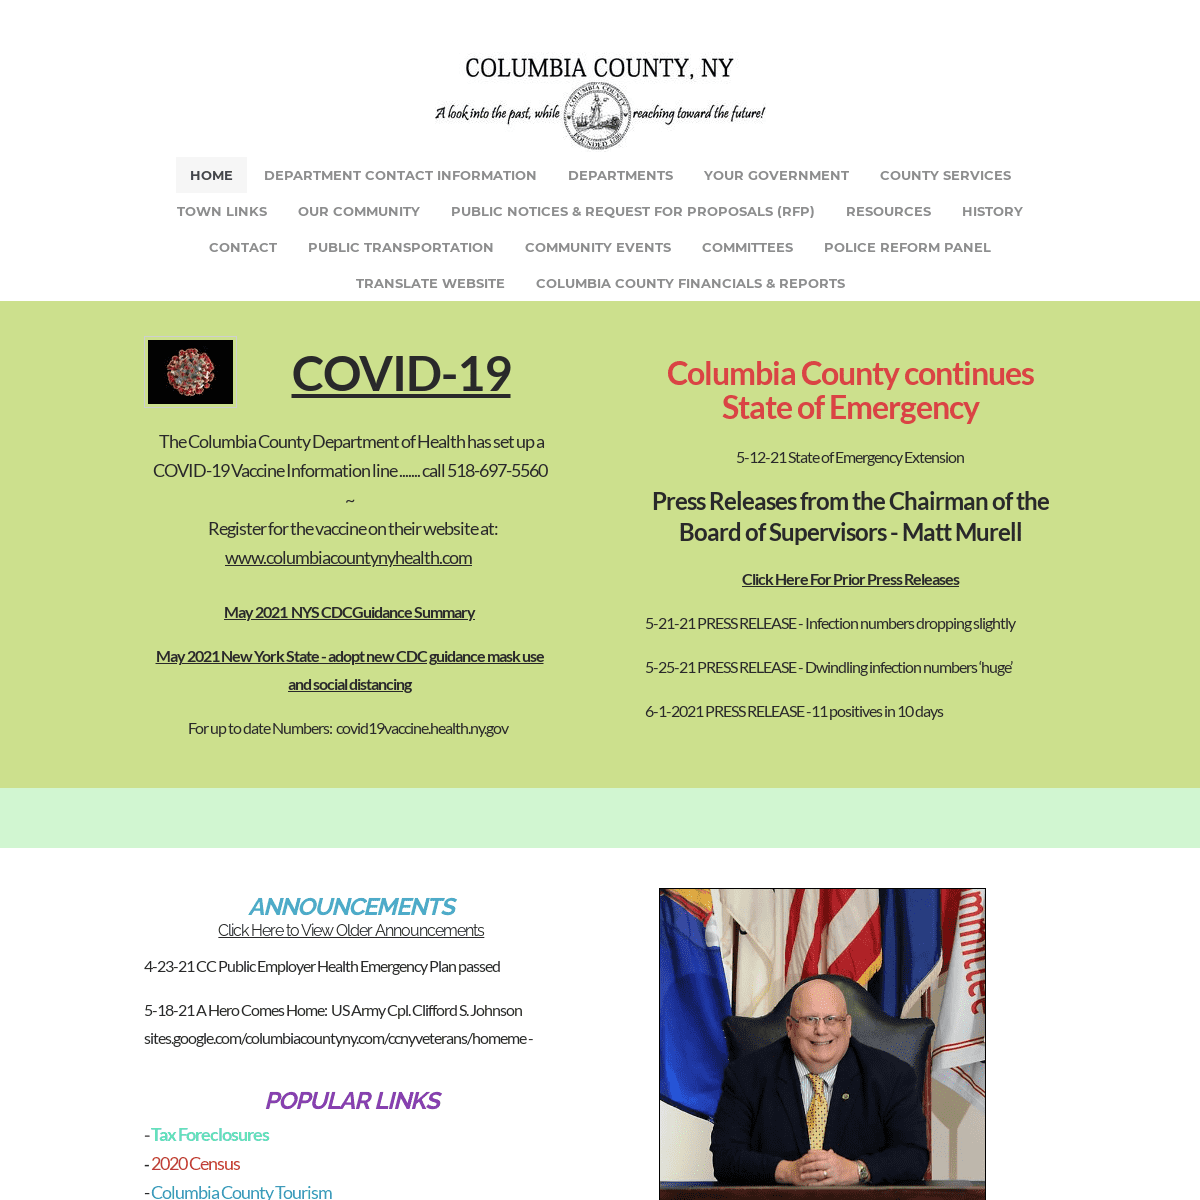 A complete backup of https://columbiacountyny.com